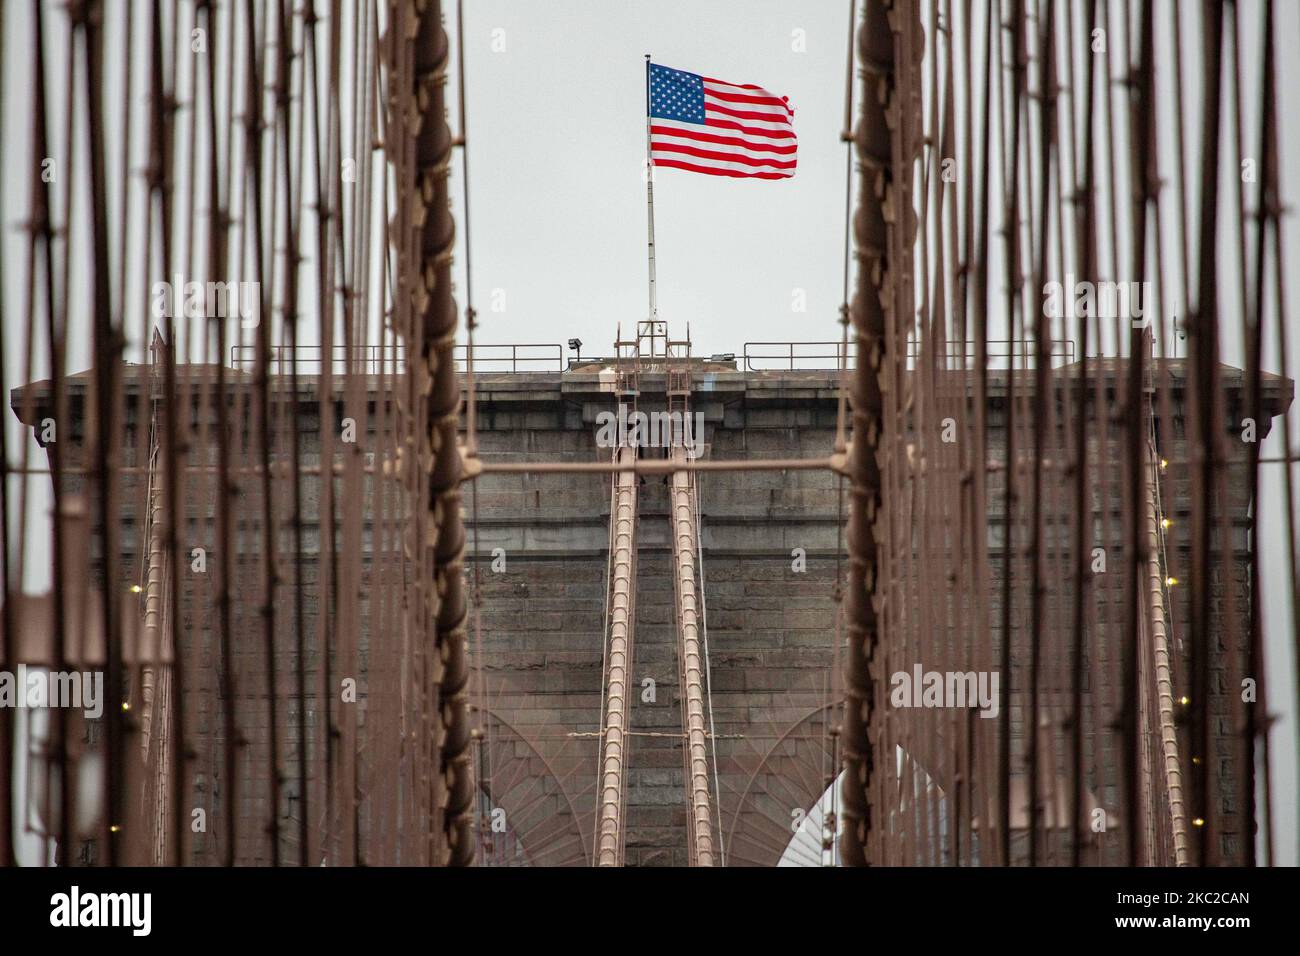 The US flag on the tower of the Brooklyn Bridge in New York City in the United States as seen during a cloudy day with tourists and locals on it. The famous bridge, a landmark for NYC and the United States of America is a hybrid cable stayed suspension bridge spanning the East River between the boroughs of Manhattan and Brooklyn. The historical NY landmark bridge was built between 1869 and 1883. New York, USA on February 13, 2020 (Photo by Nicolas Economou/NurPhoto) Stock Photo